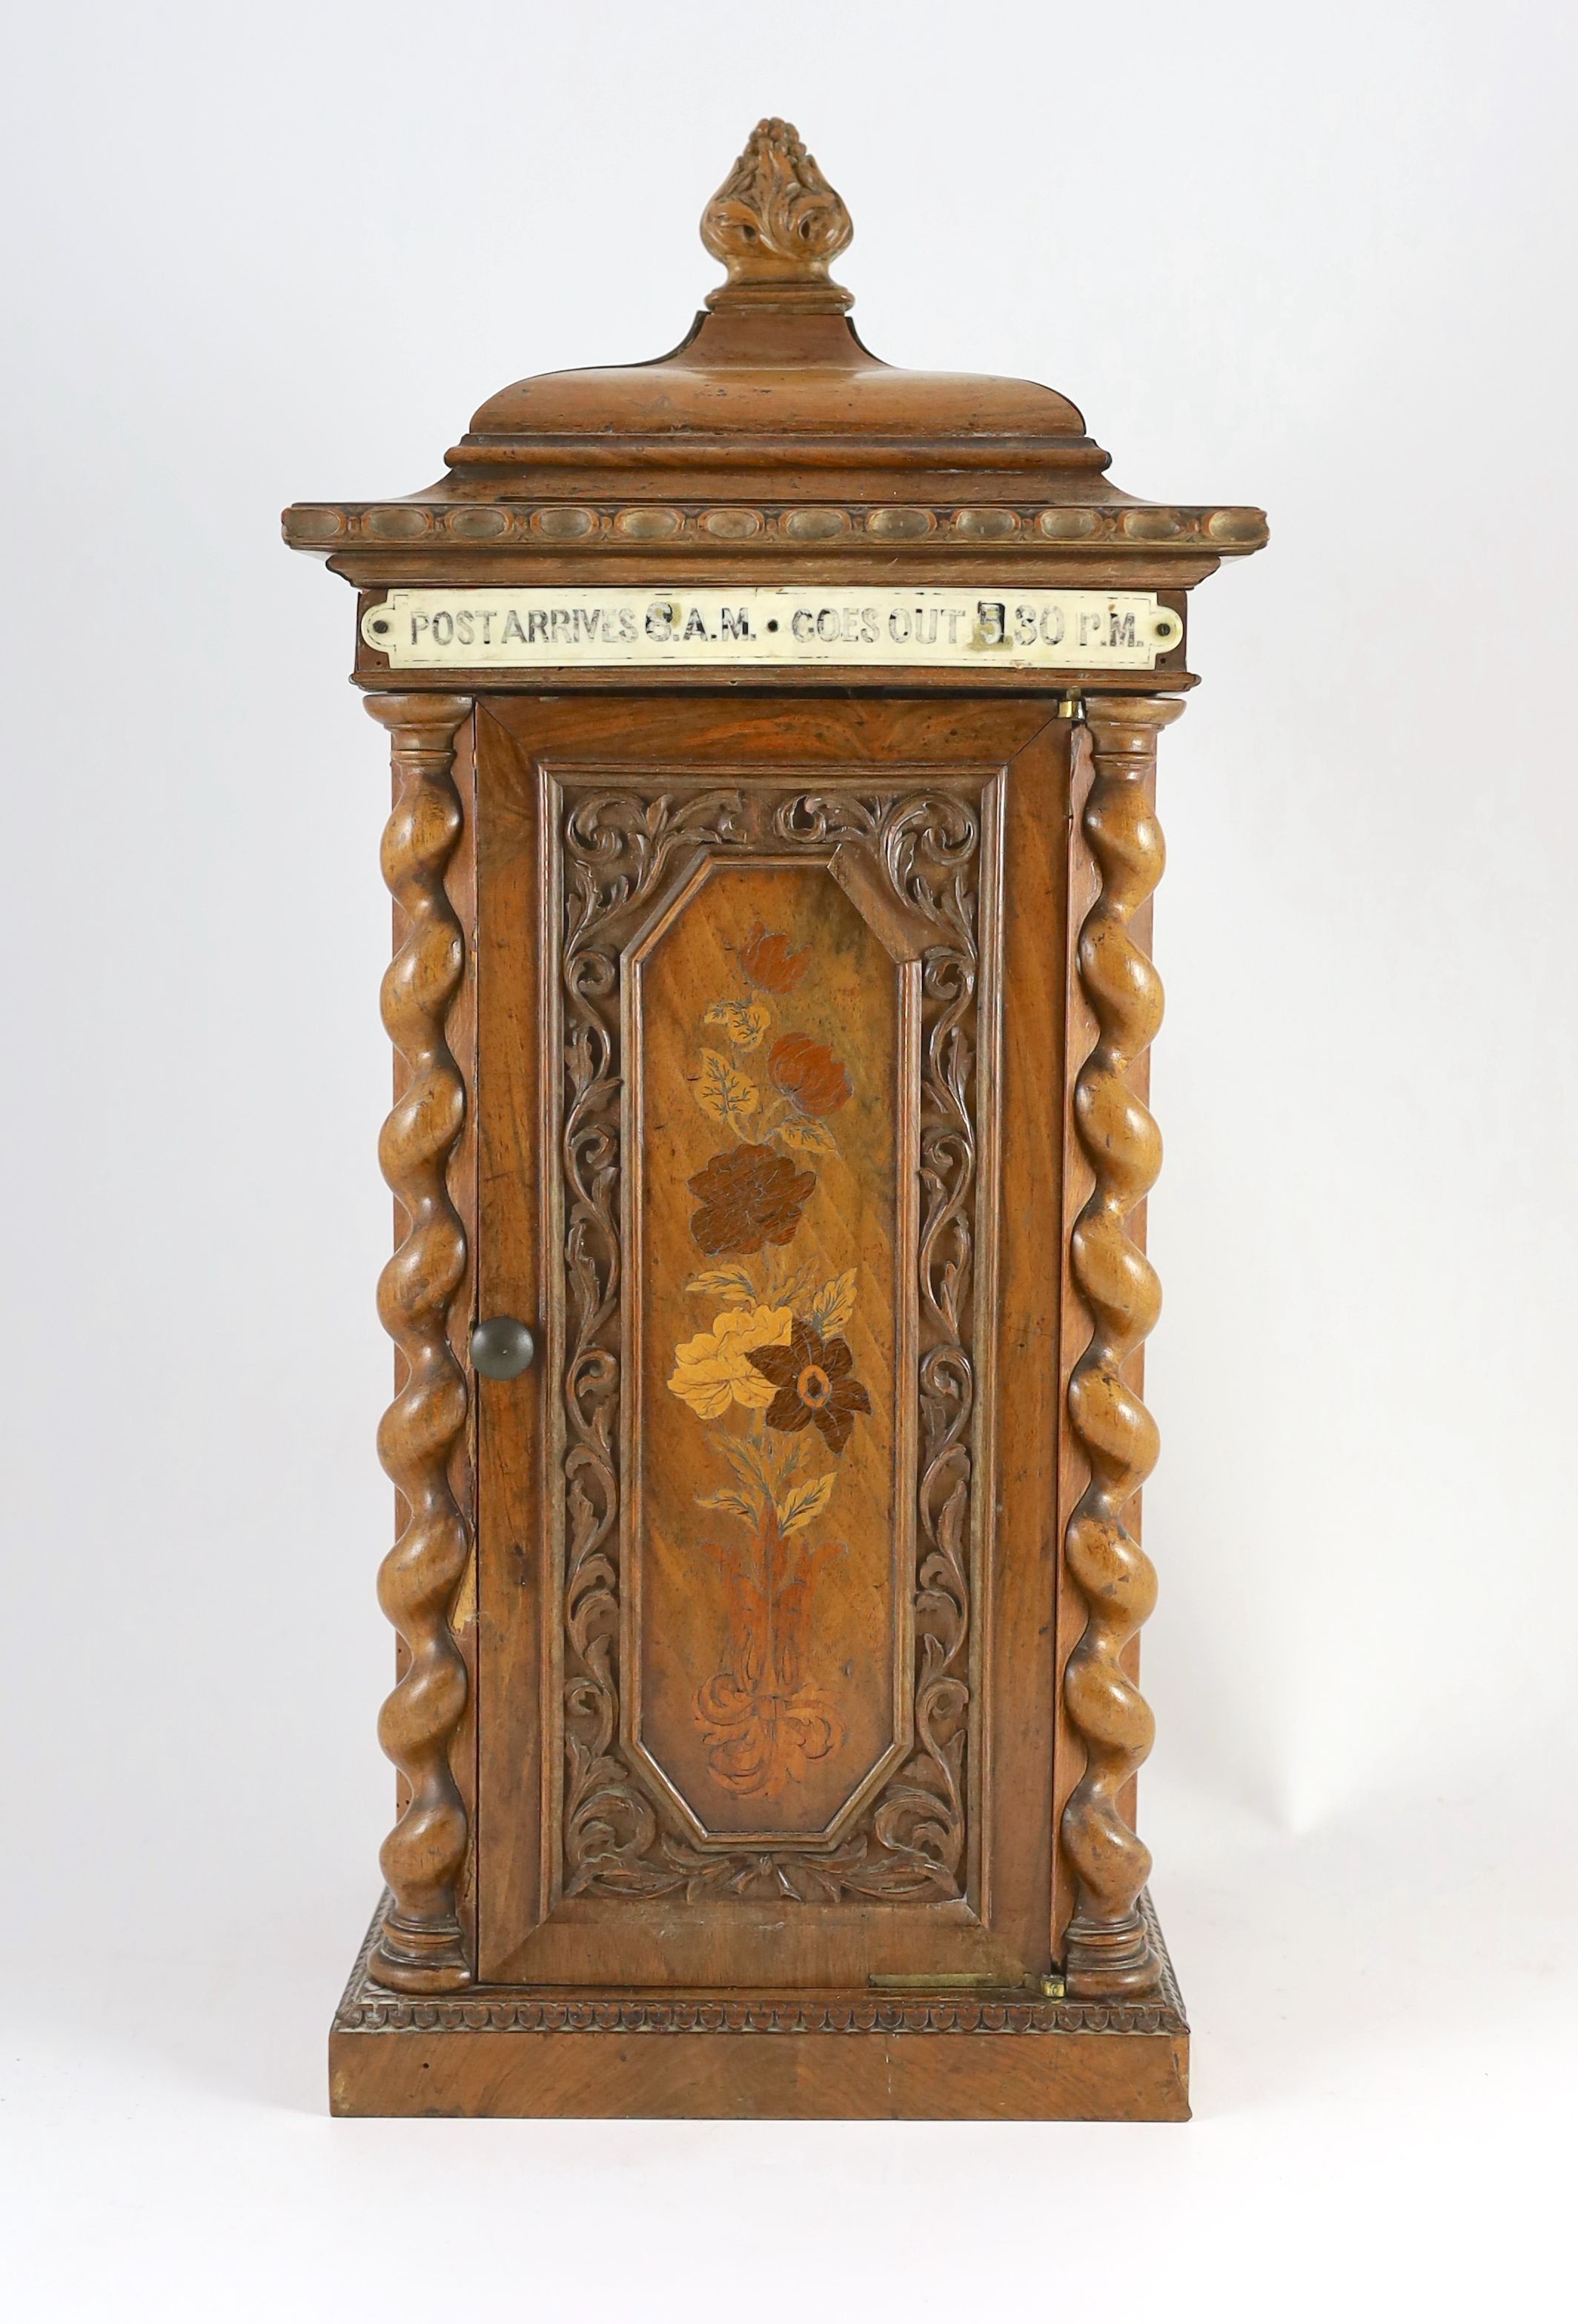 A mid 19th century French marquetry inlaid walnut country house post box, width 26cm depth 24cm height 56cm